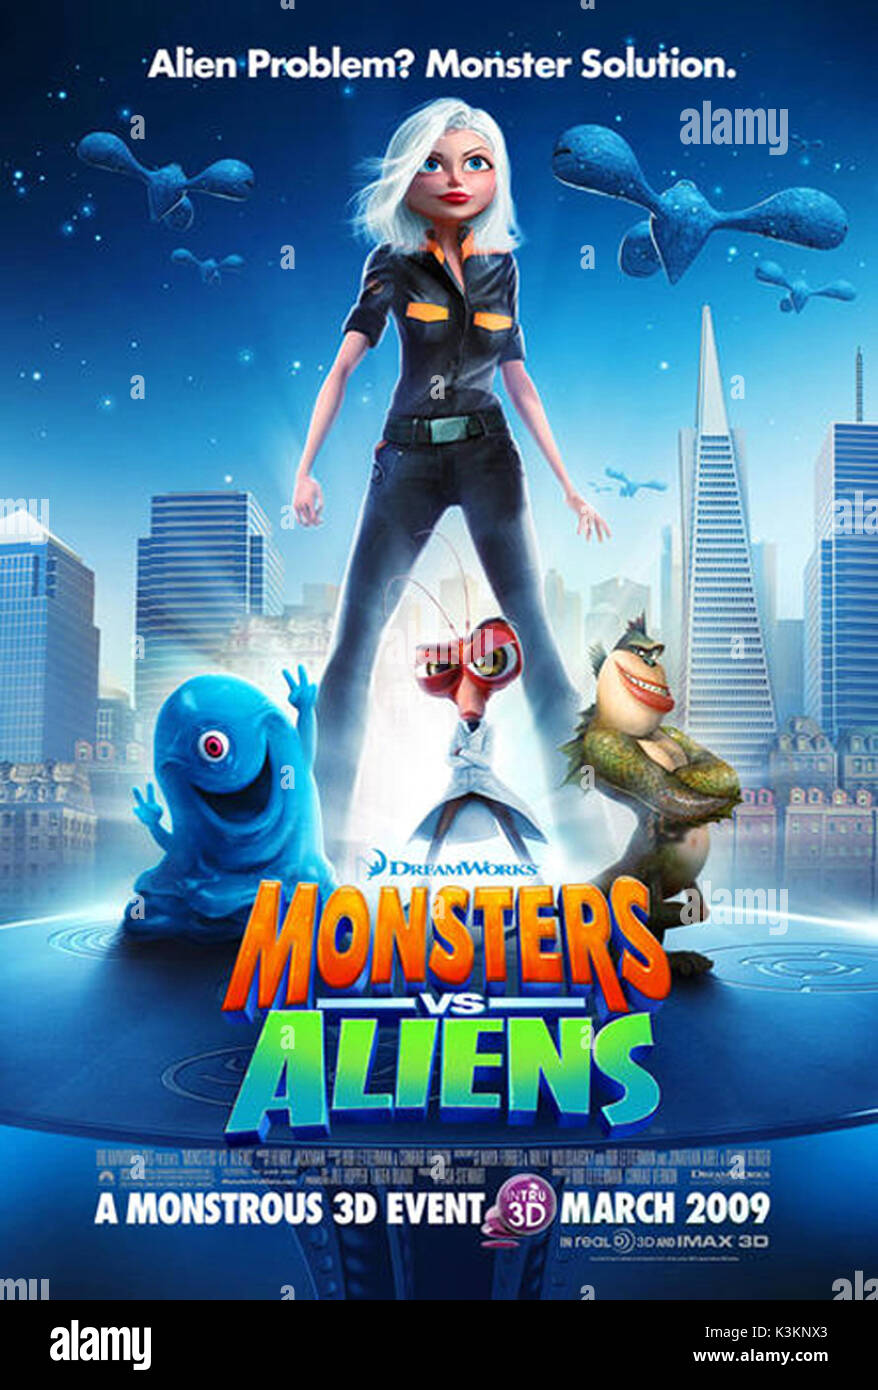 Dinner and a Movie: 'Monsters vs. Aliens' and Monster Mini Golf